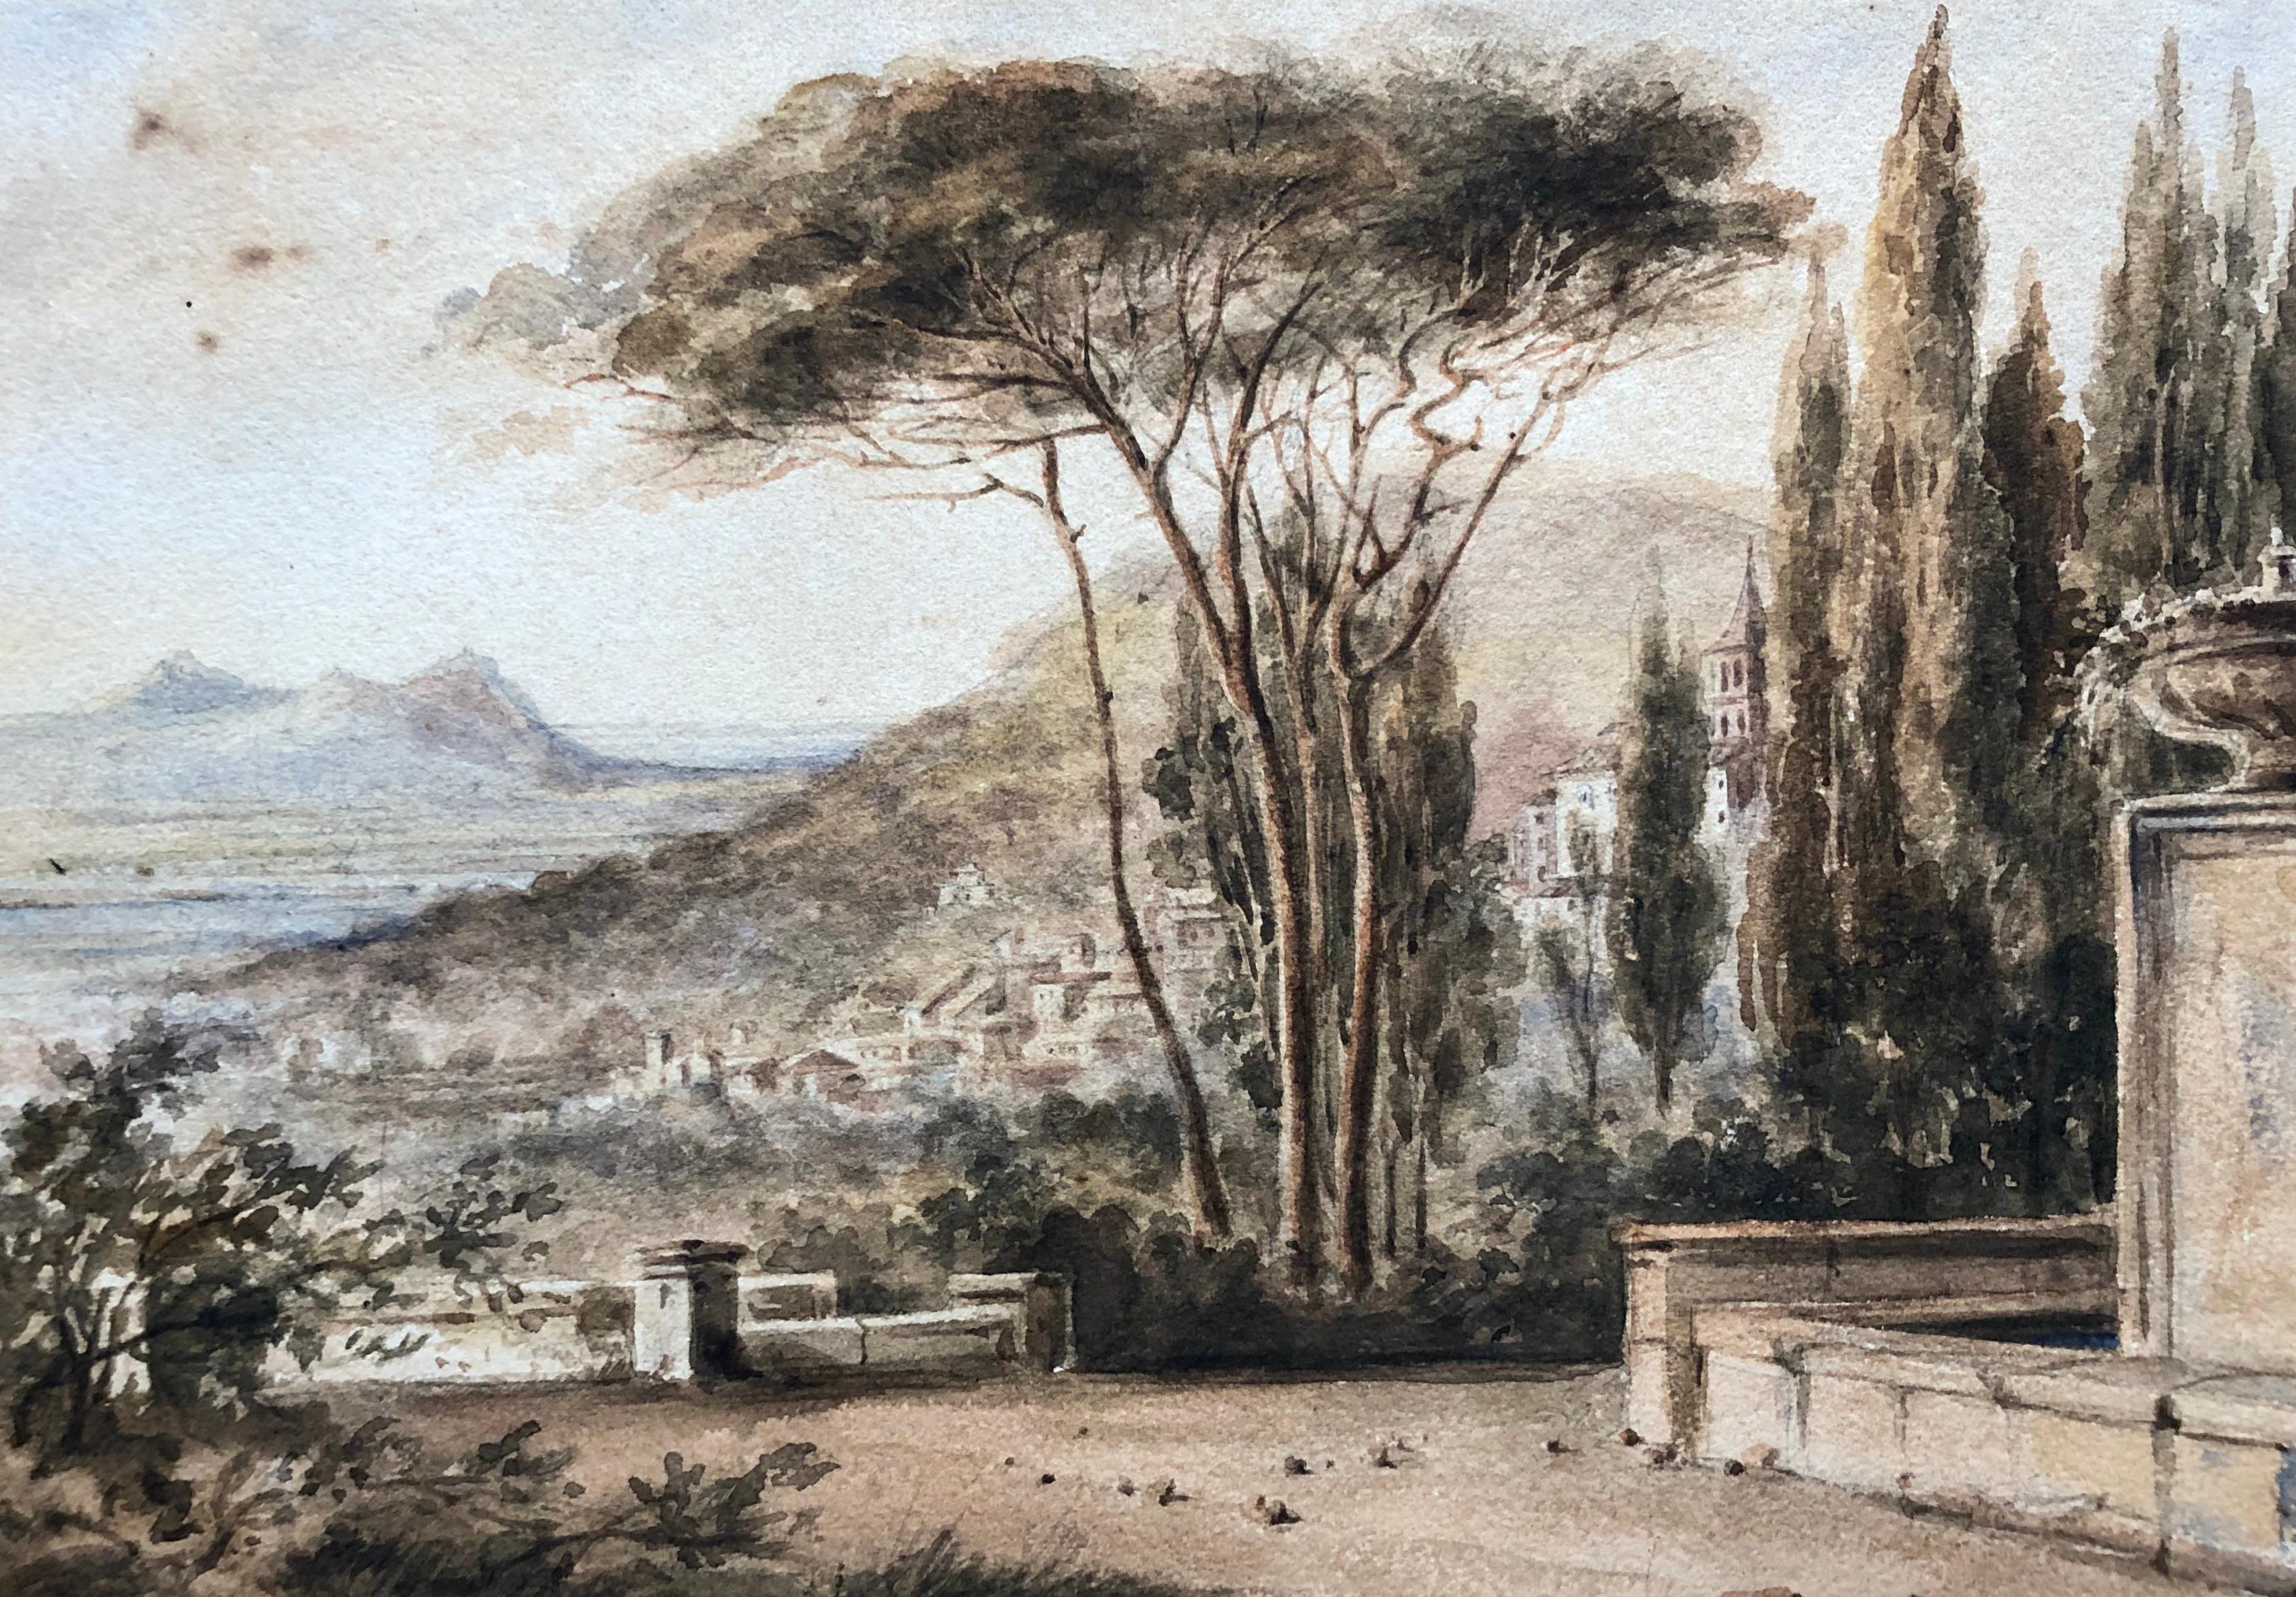 Unknown Landscape Art - Landscape Of Italy? 19th Century Watercolor